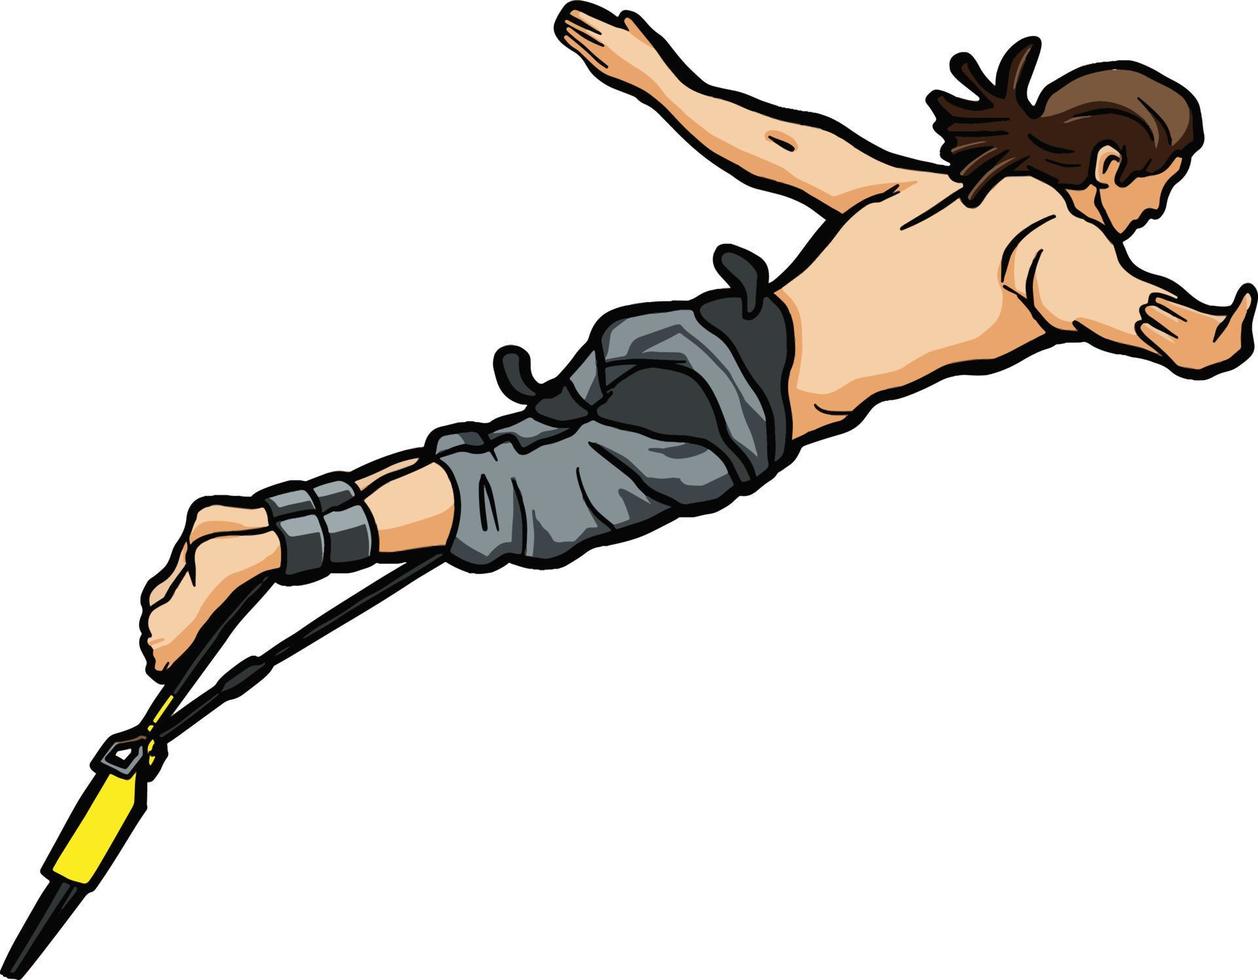 Bungee jumping extreme sport adventure vector